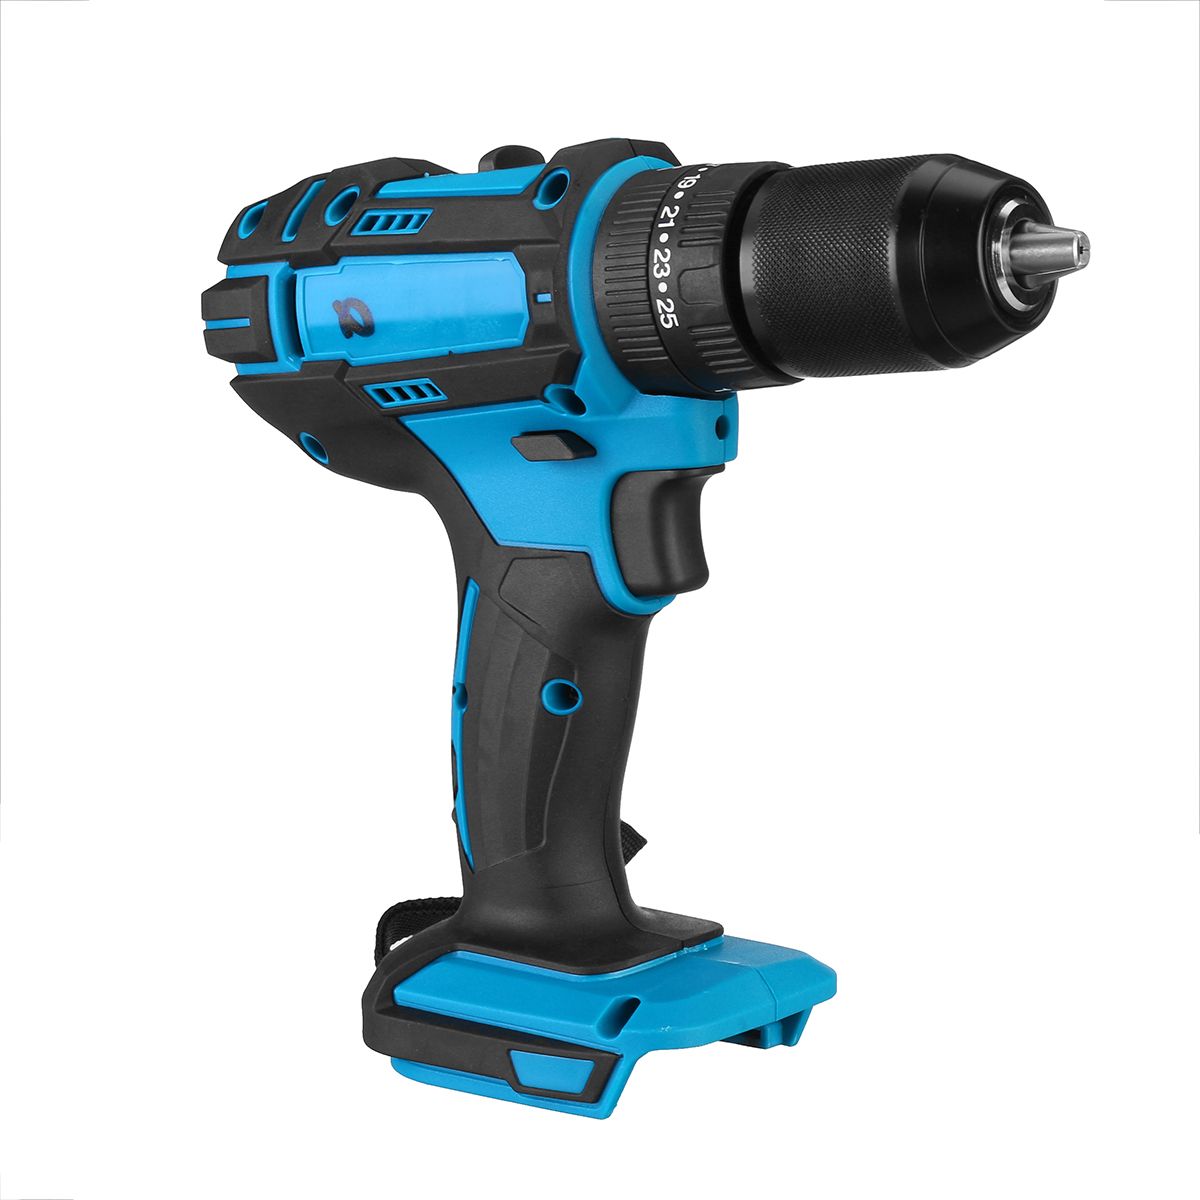 18V-Cordless-Electric-Drill-Driver-Impact-Torque-For-Makita-Power-Tool-1695066